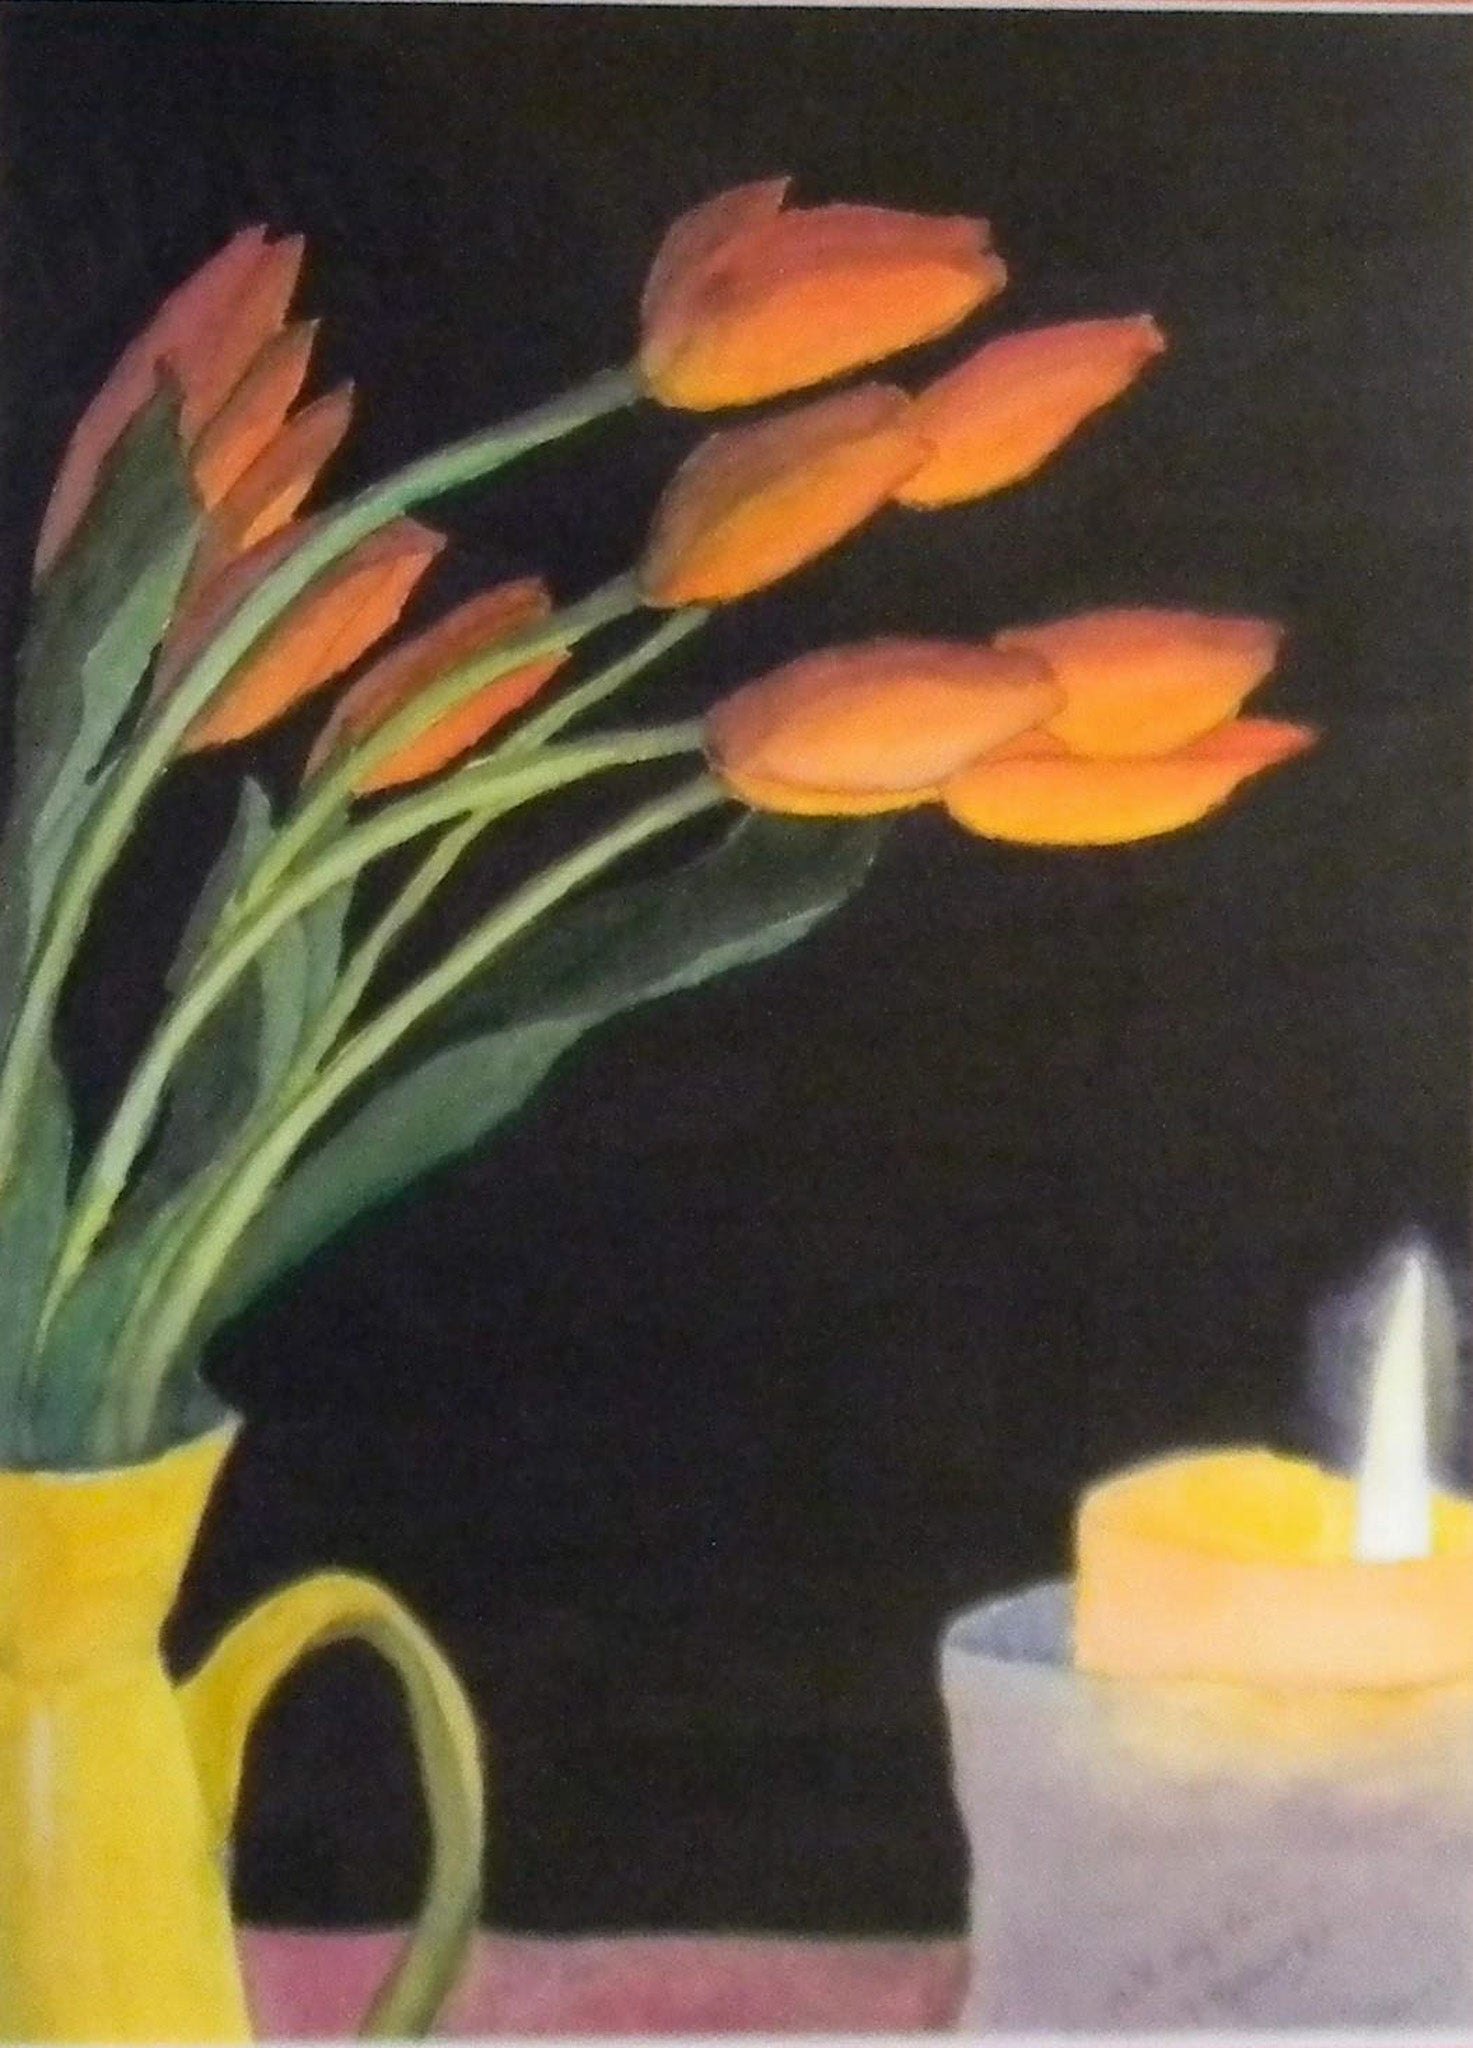 Tulips to a flame